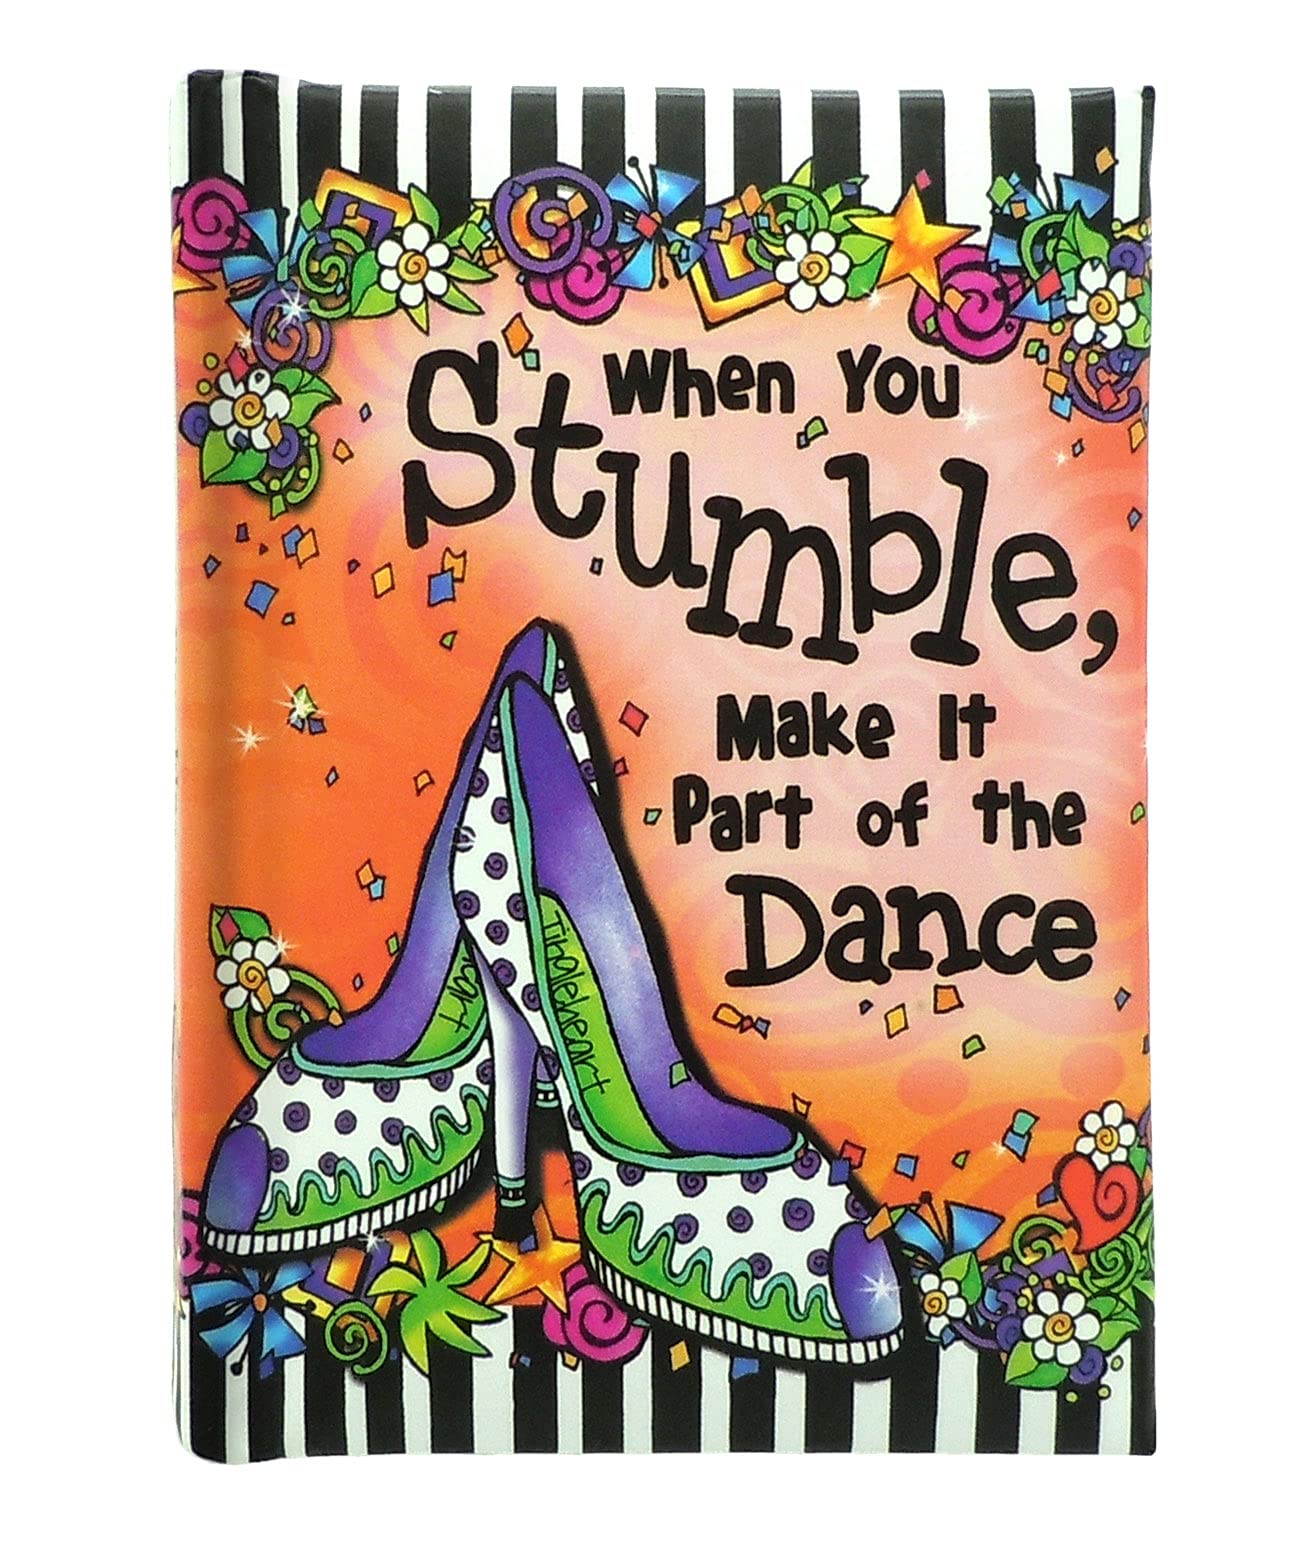 Blue Mountain Arts Mini Book (When You Stumble, Make It Part of the Dance)—Birthday Gift, Encouragement Gift, Women Friendship Gift, or Gift for Her by Suzy Toronto, 4 x 3 inches